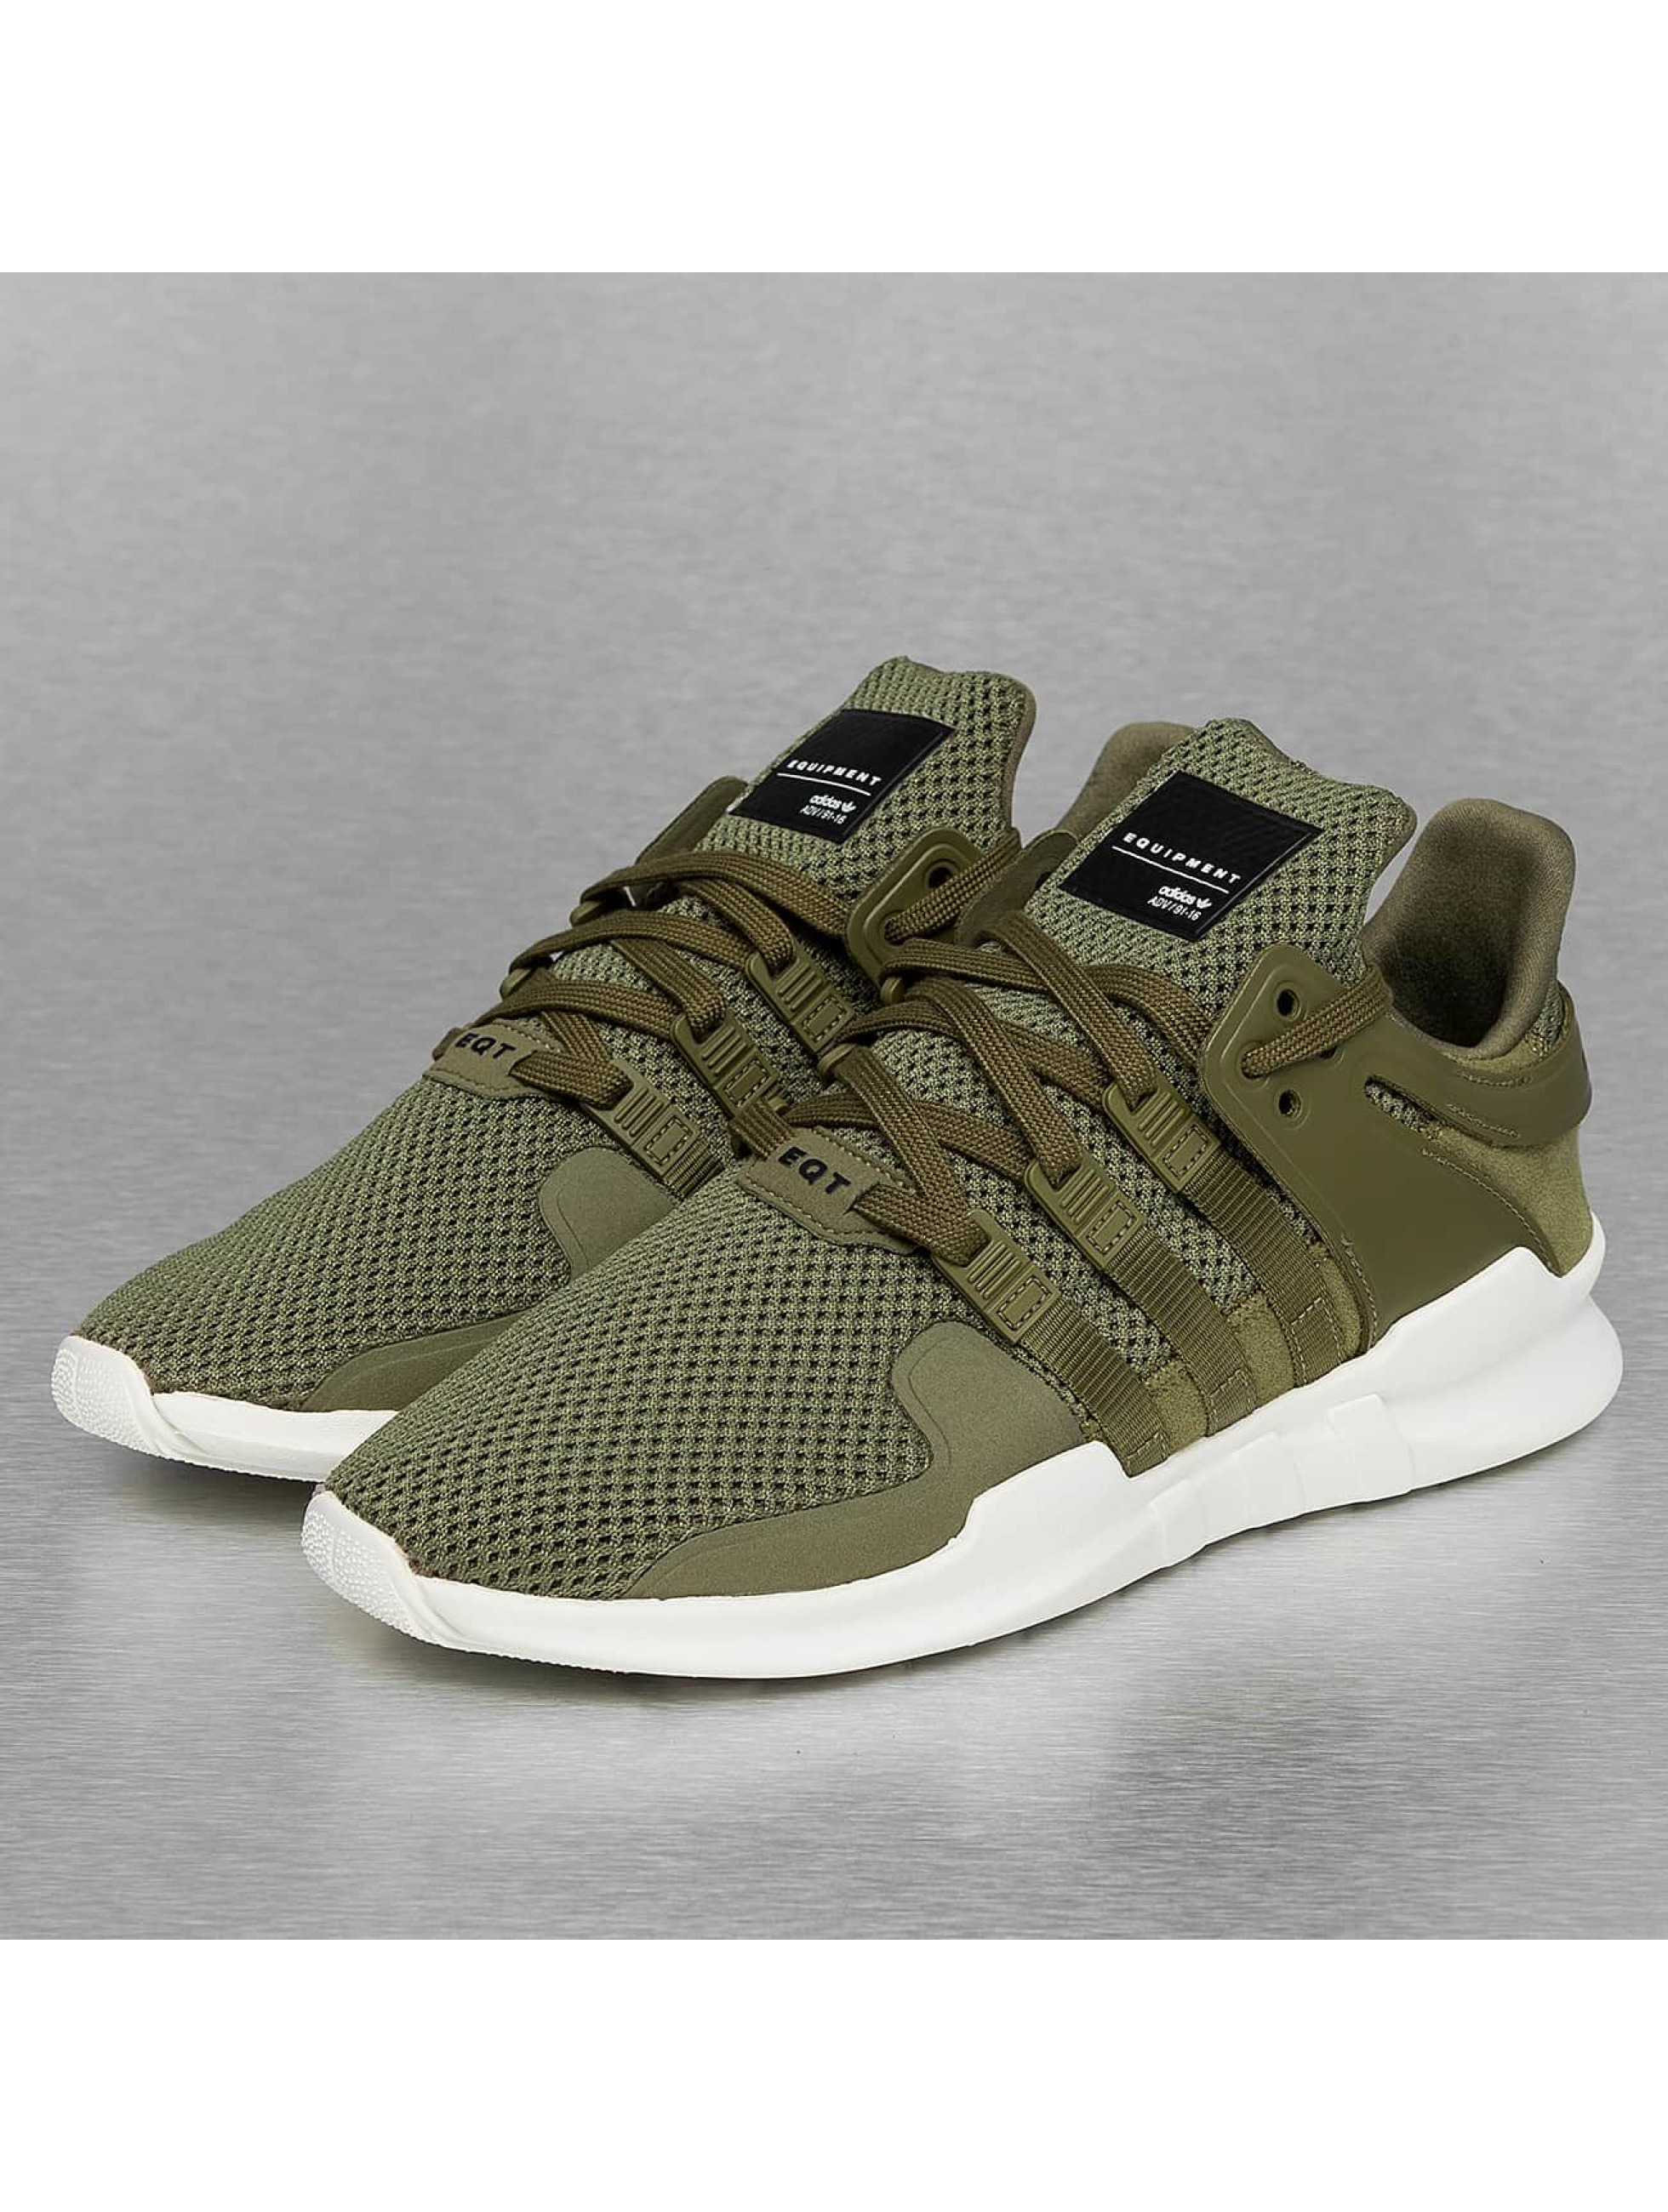 adidas Chaussures / Baskets Equipment Support ADV en olive